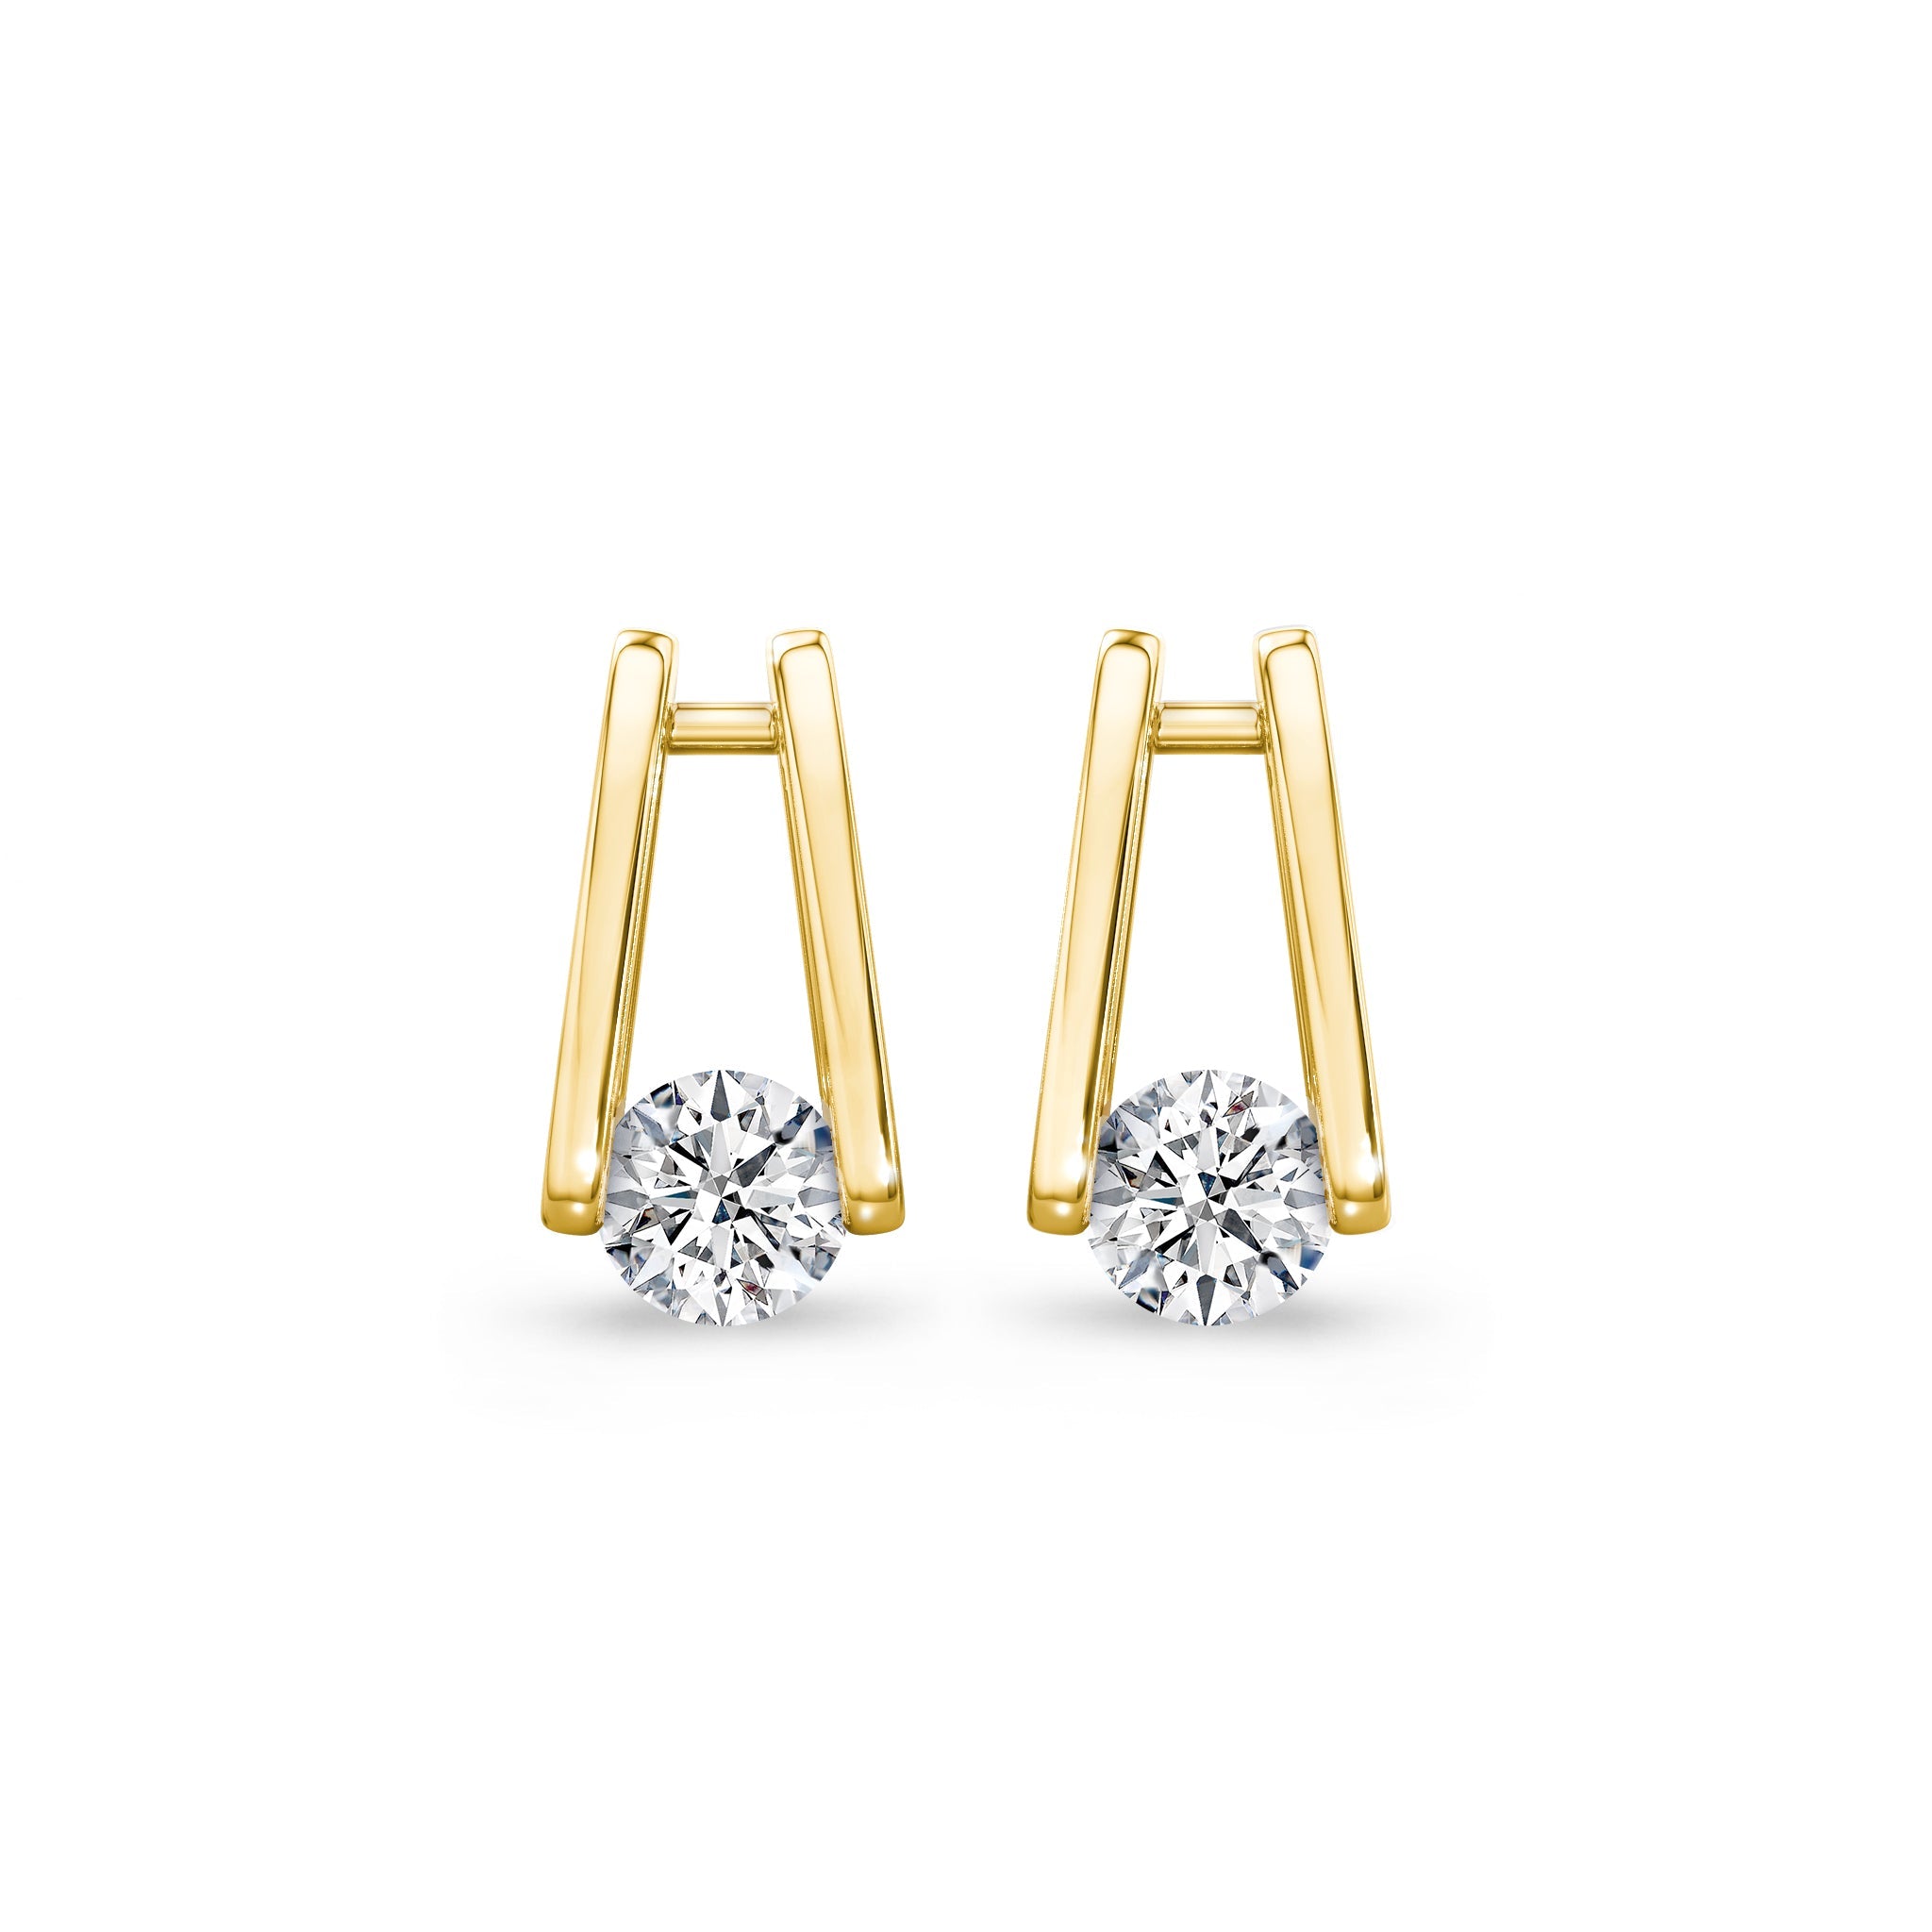 Millennium Classic Diamond Earrings 0.60 Carat in 18K Yellow Gold Front View